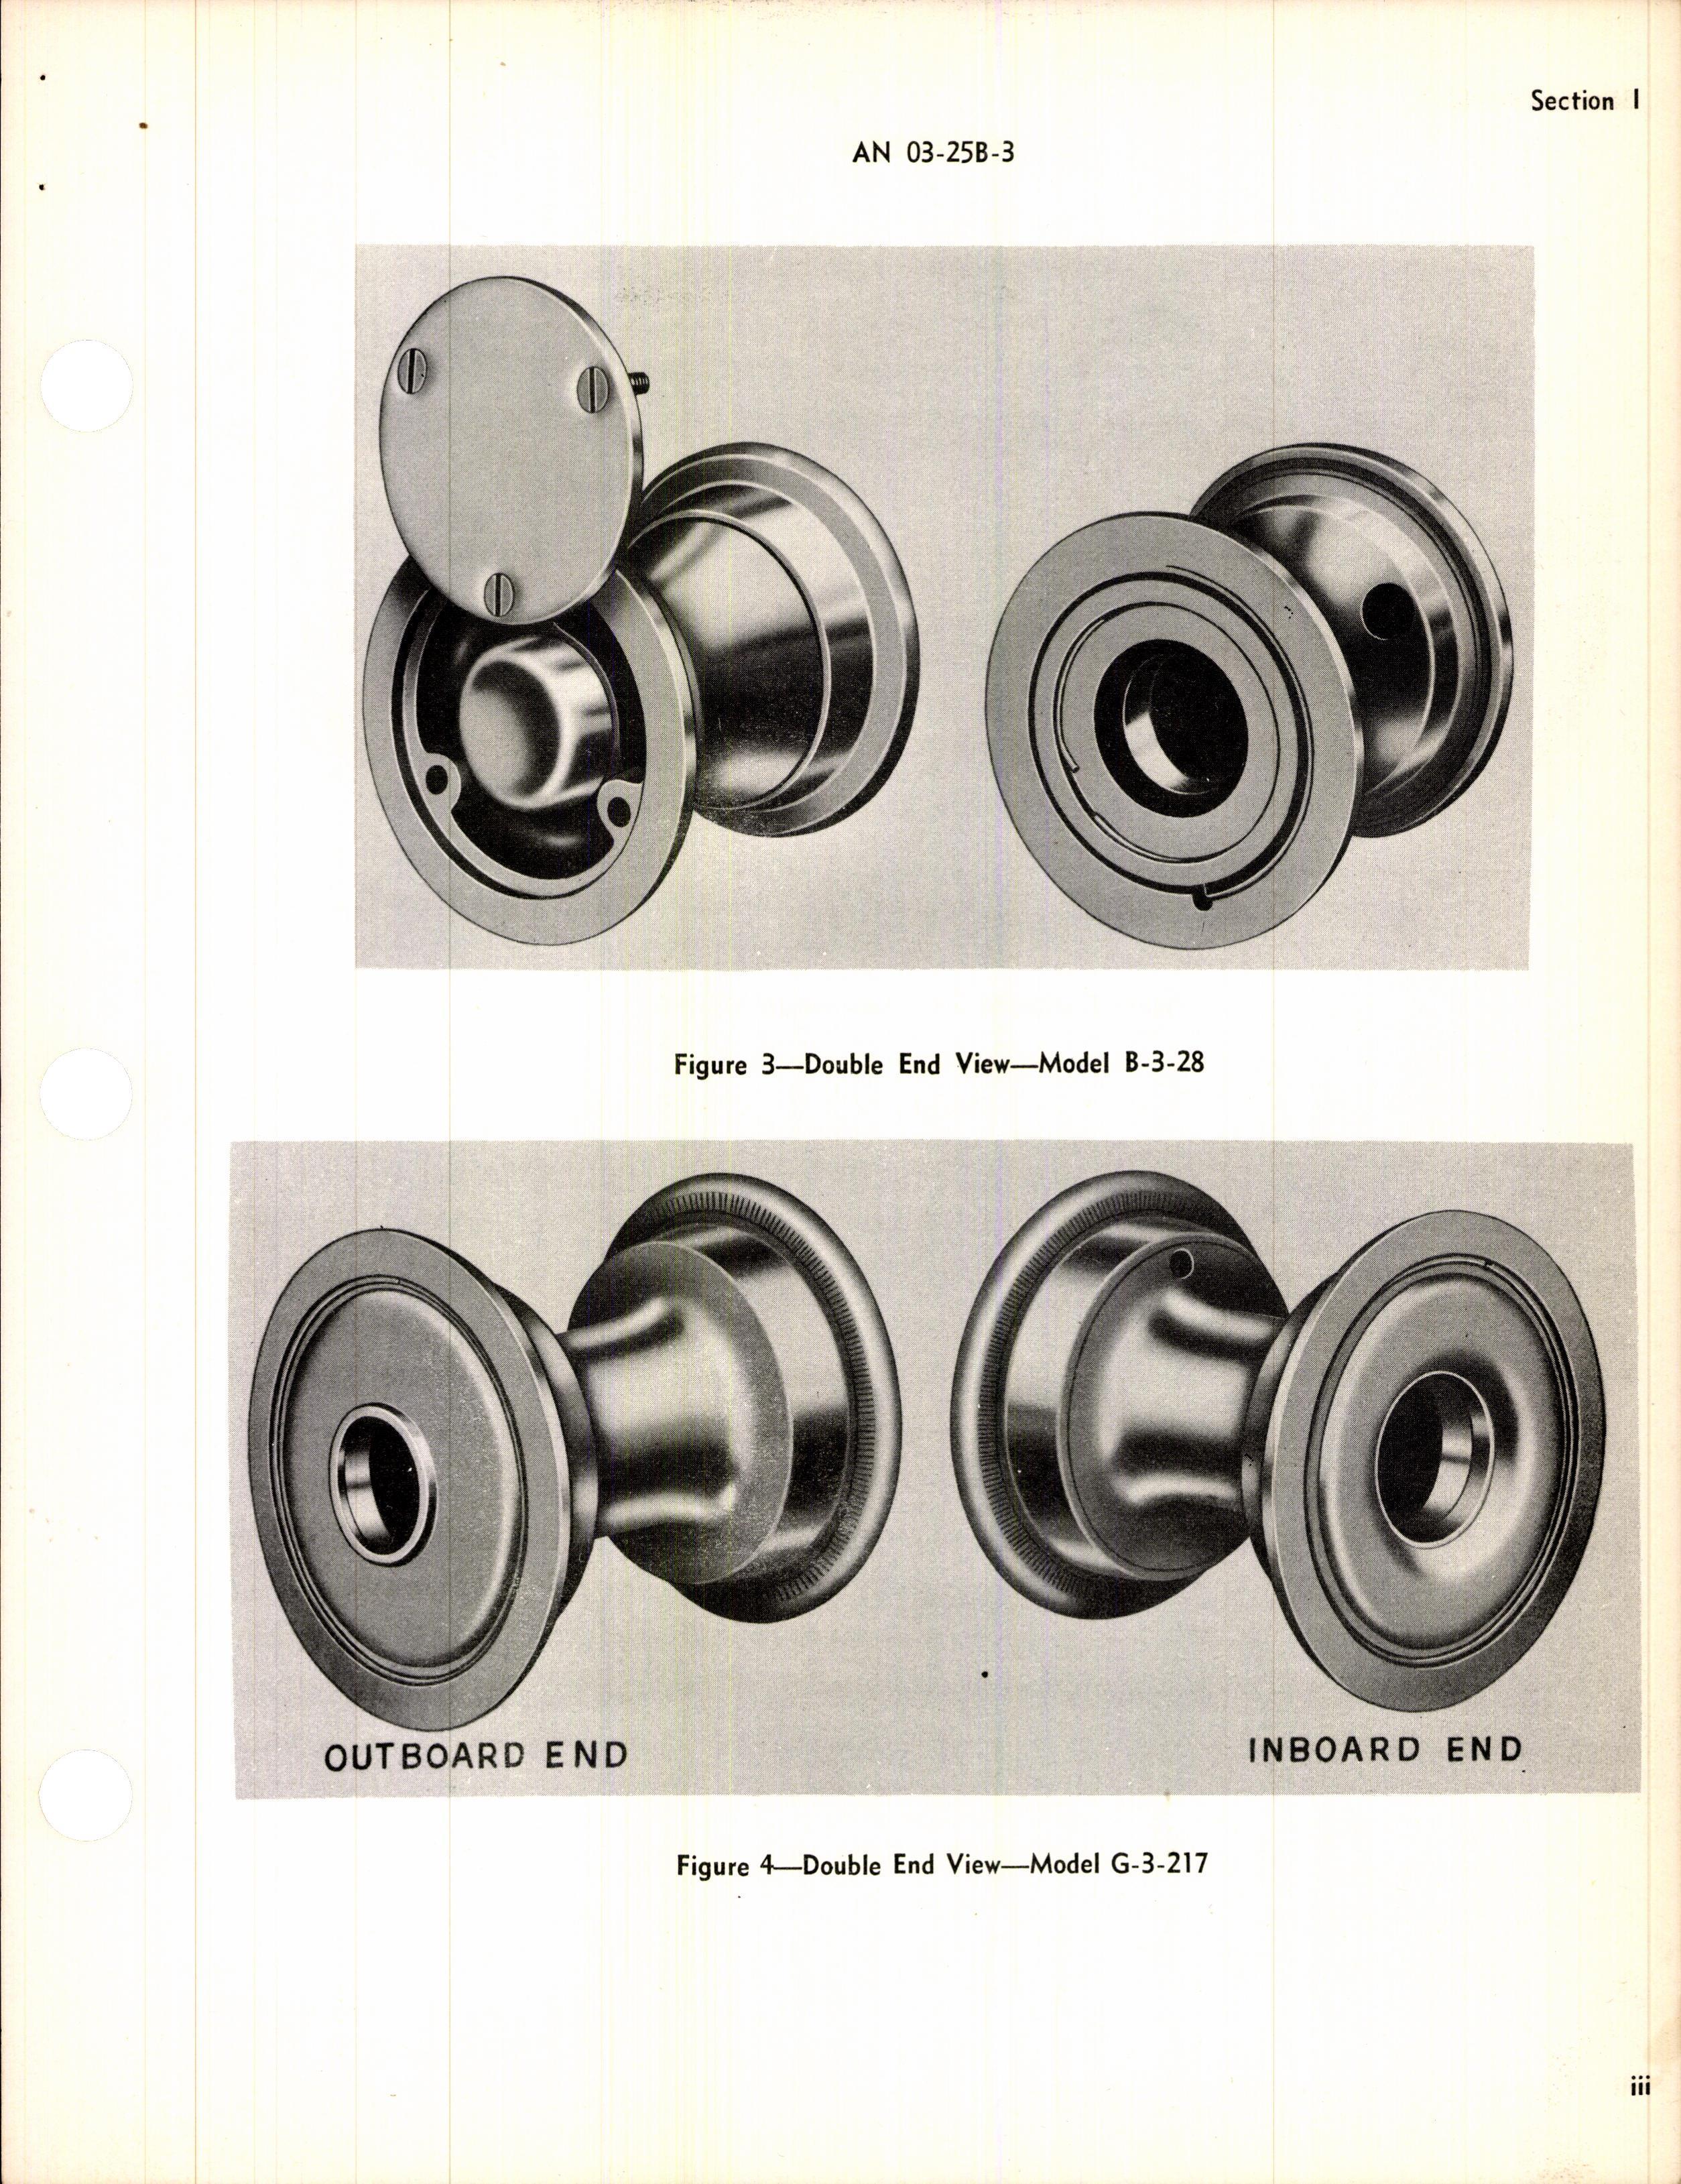 Sample page 5 from AirCorps Library document: Handbook of Instructions with Parts Catalog for Hays Nose and Tail Wheels